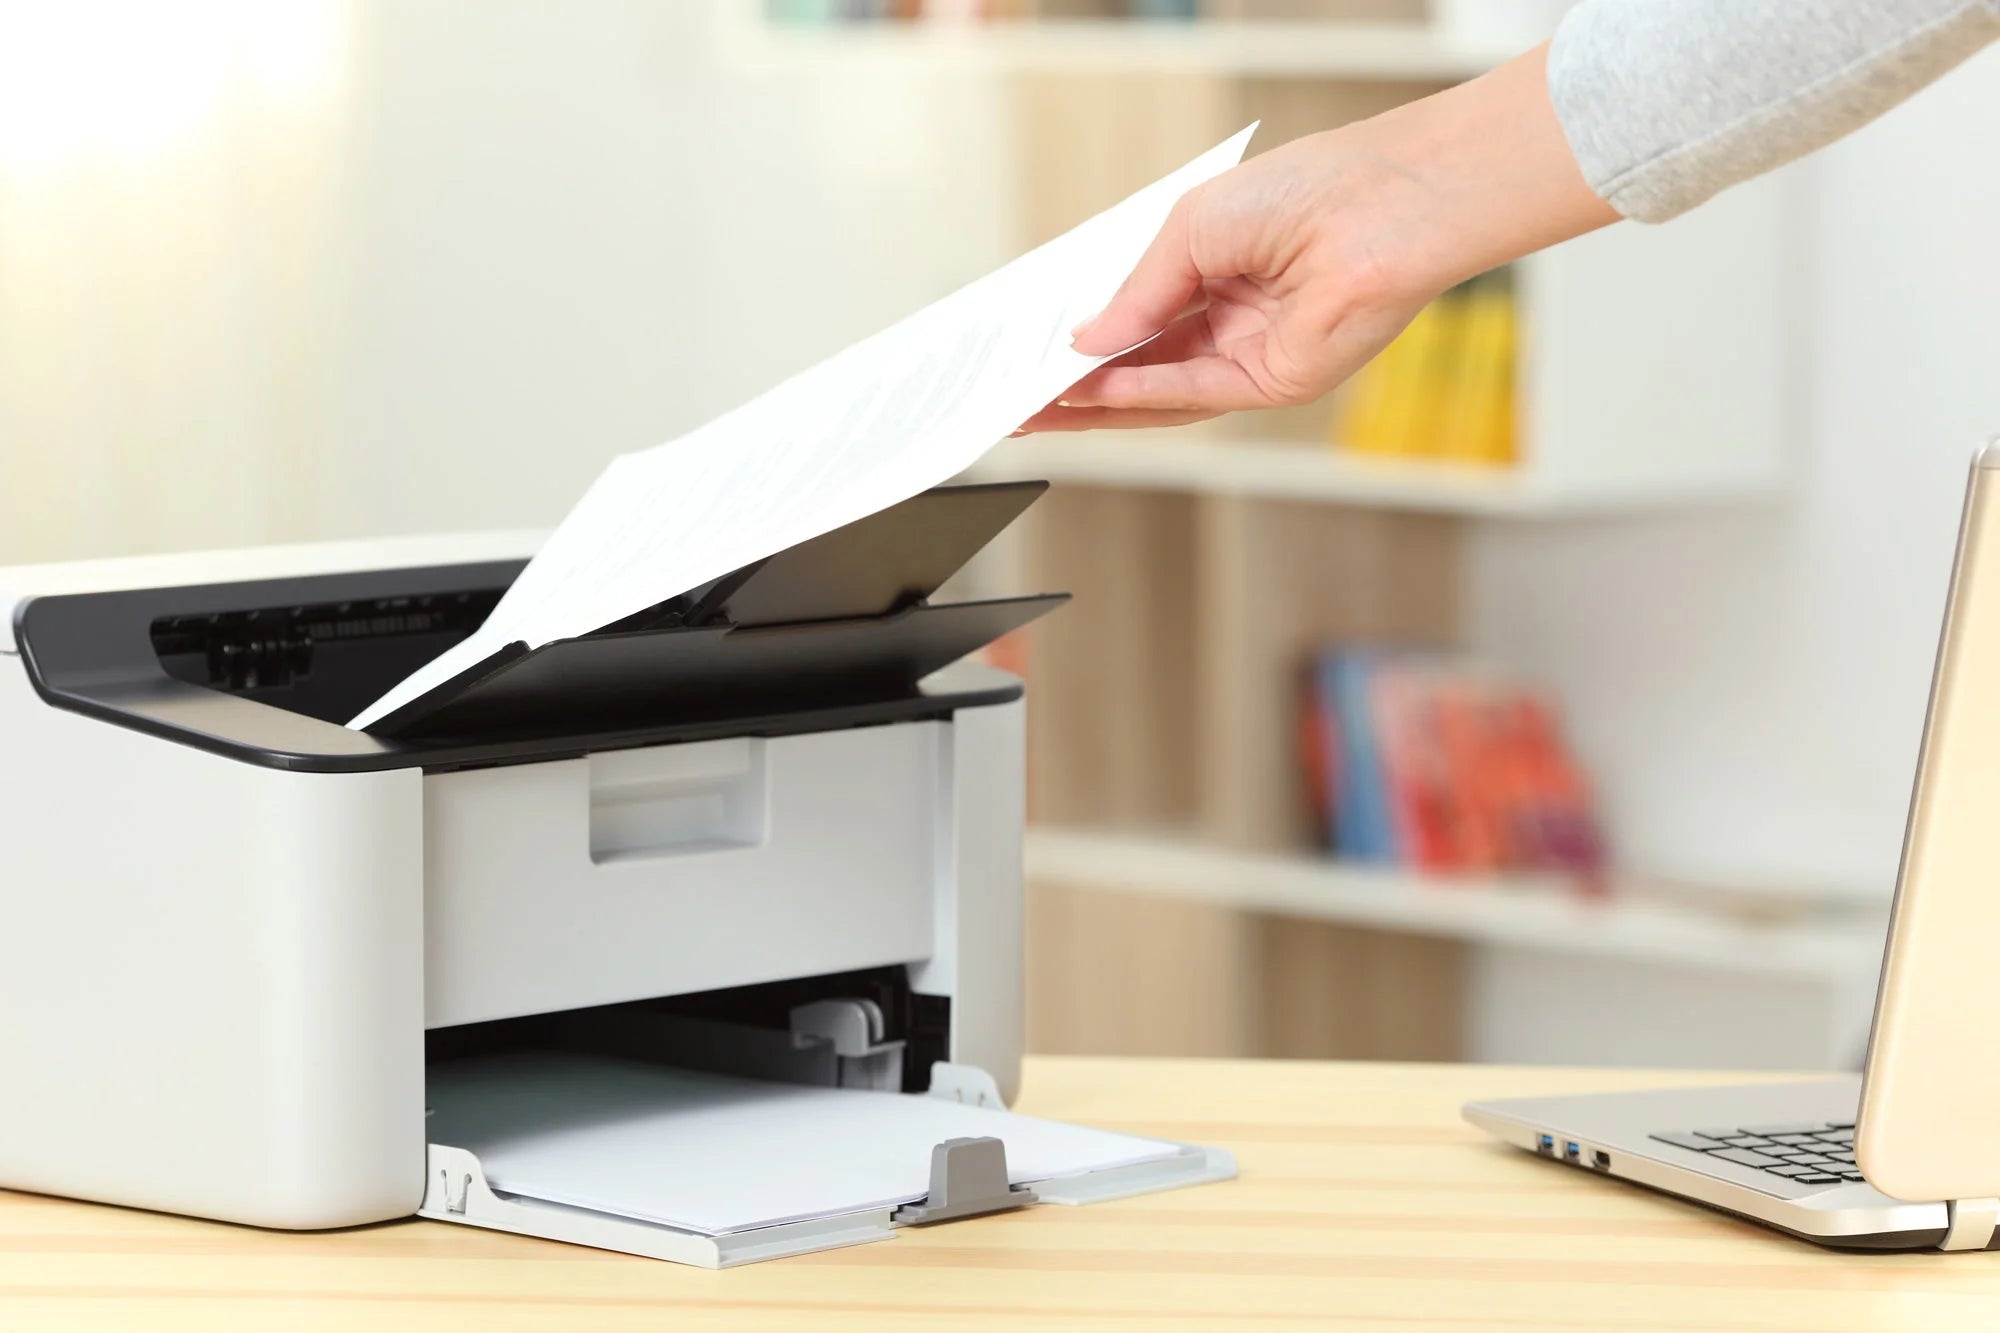 a person putting a piece of paper into a printer